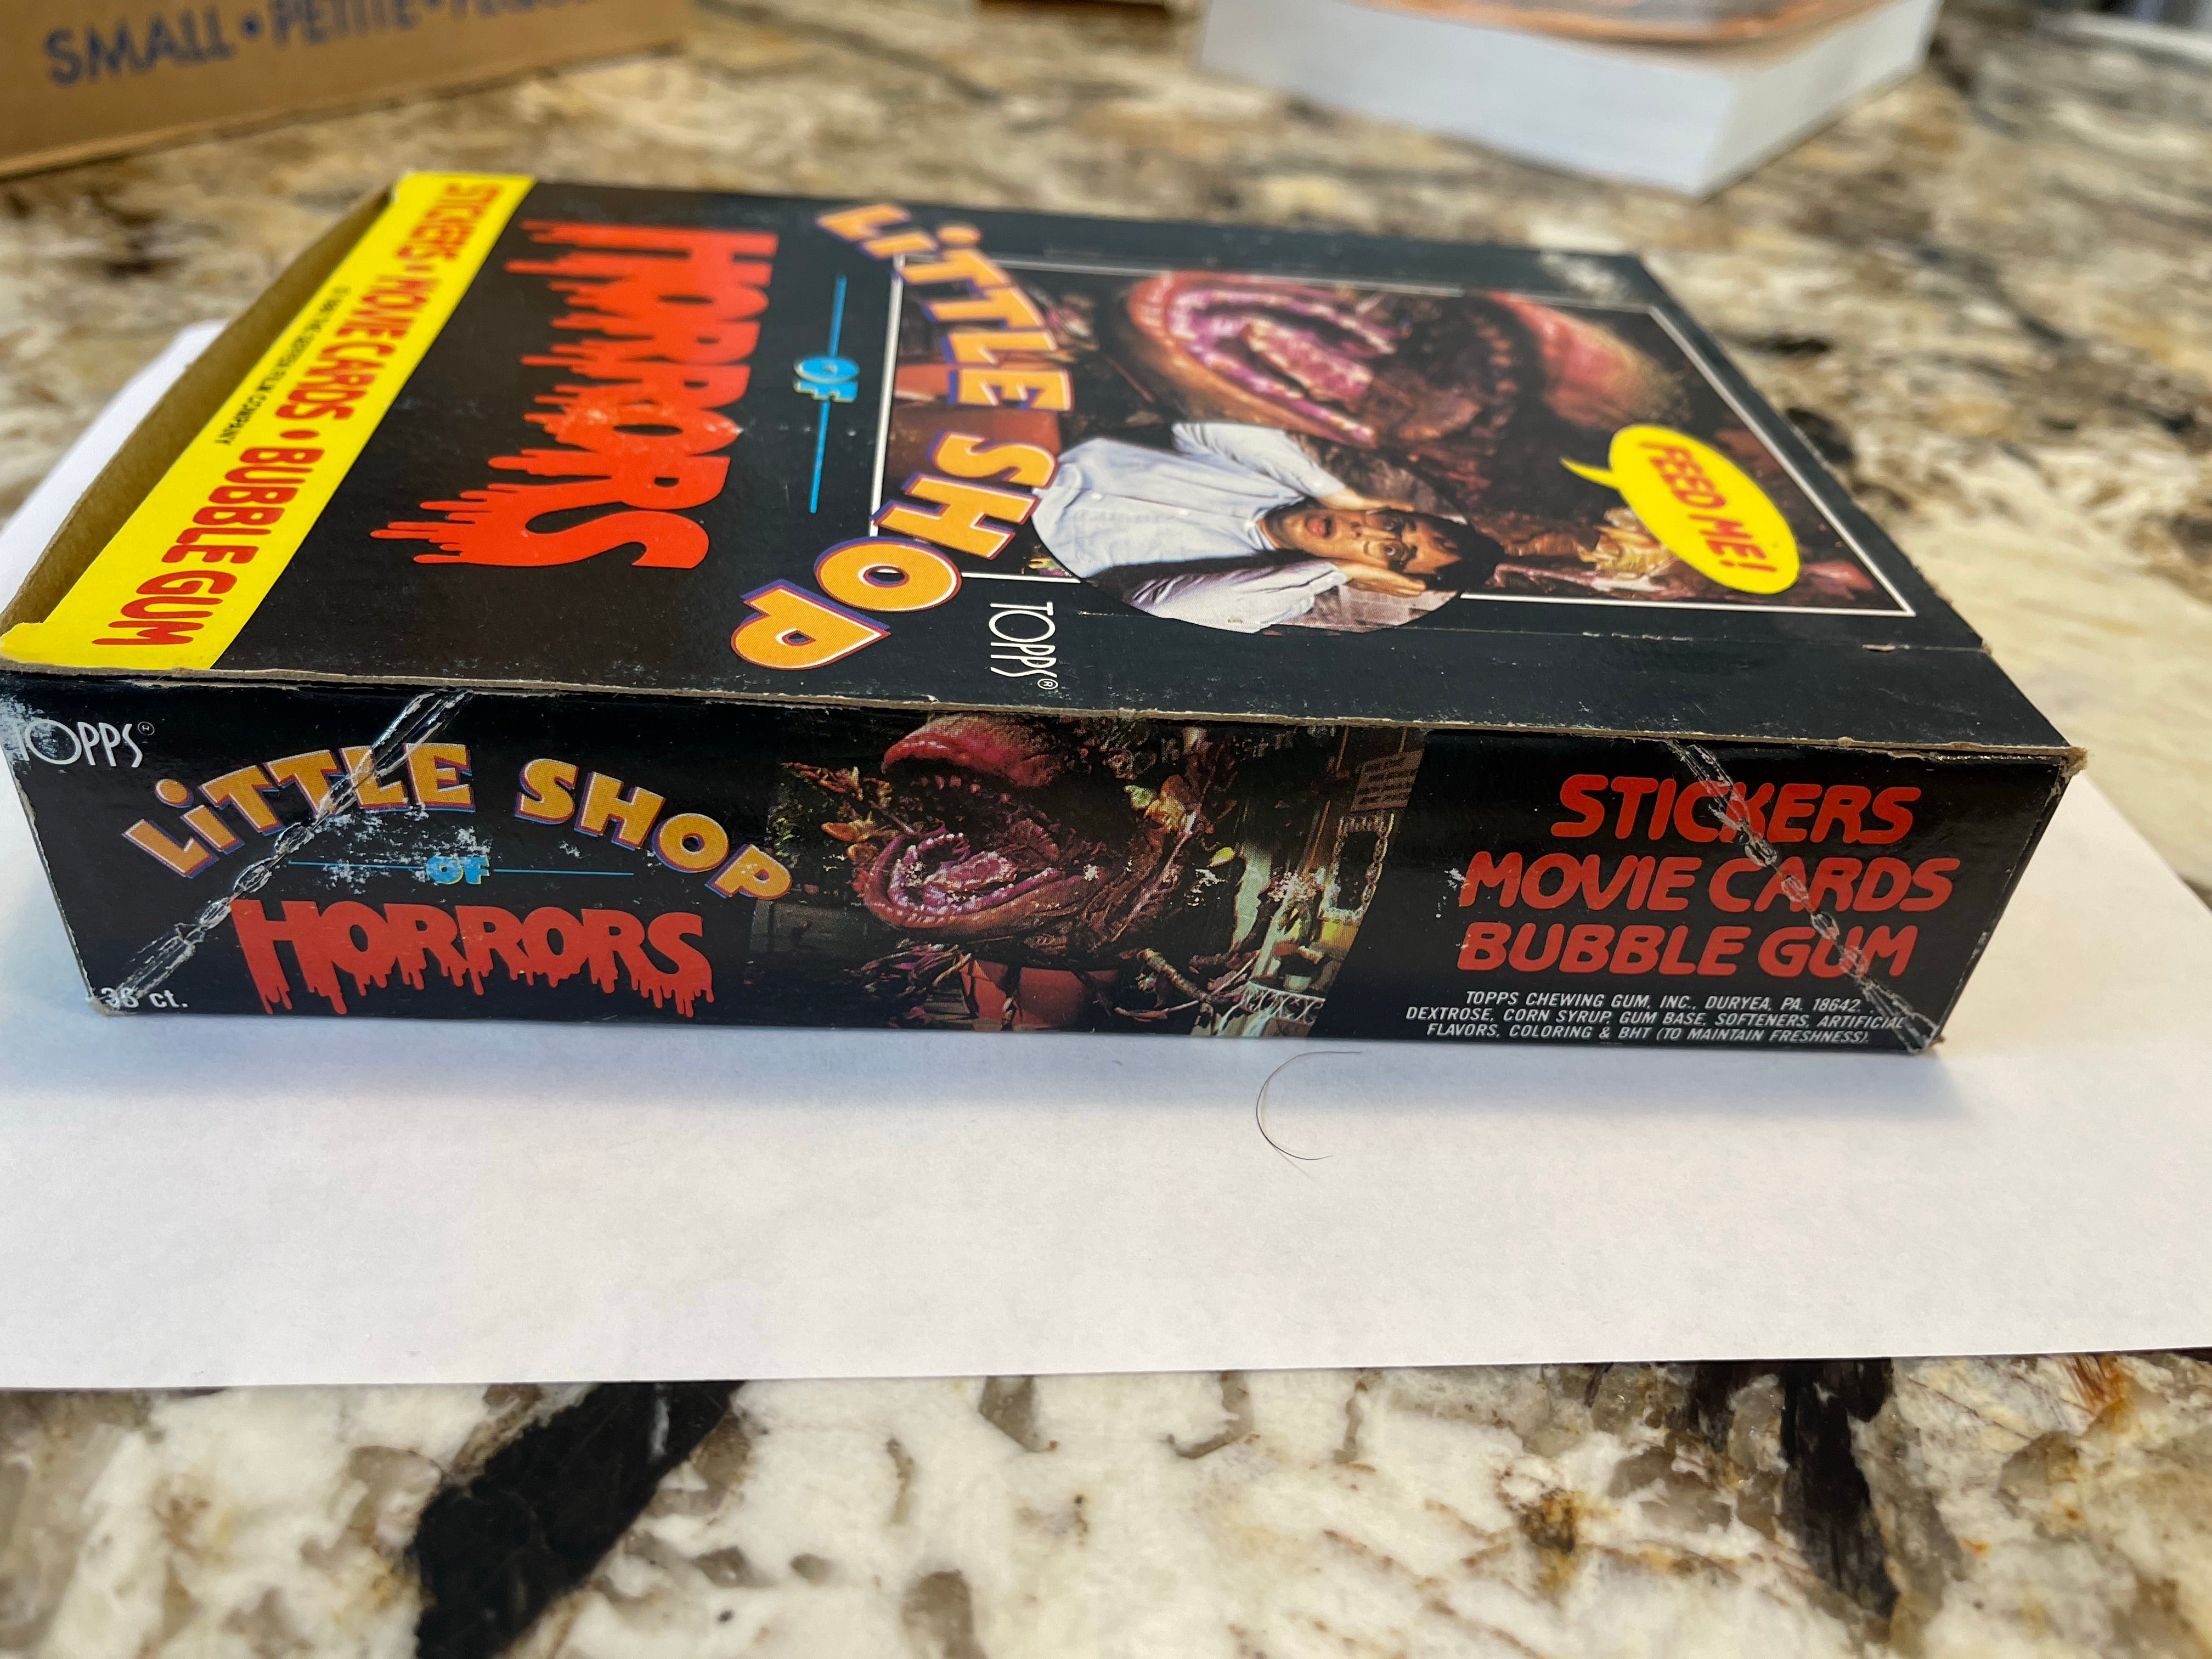 Little Shop of Horrors movie cards 36 packs box 1986